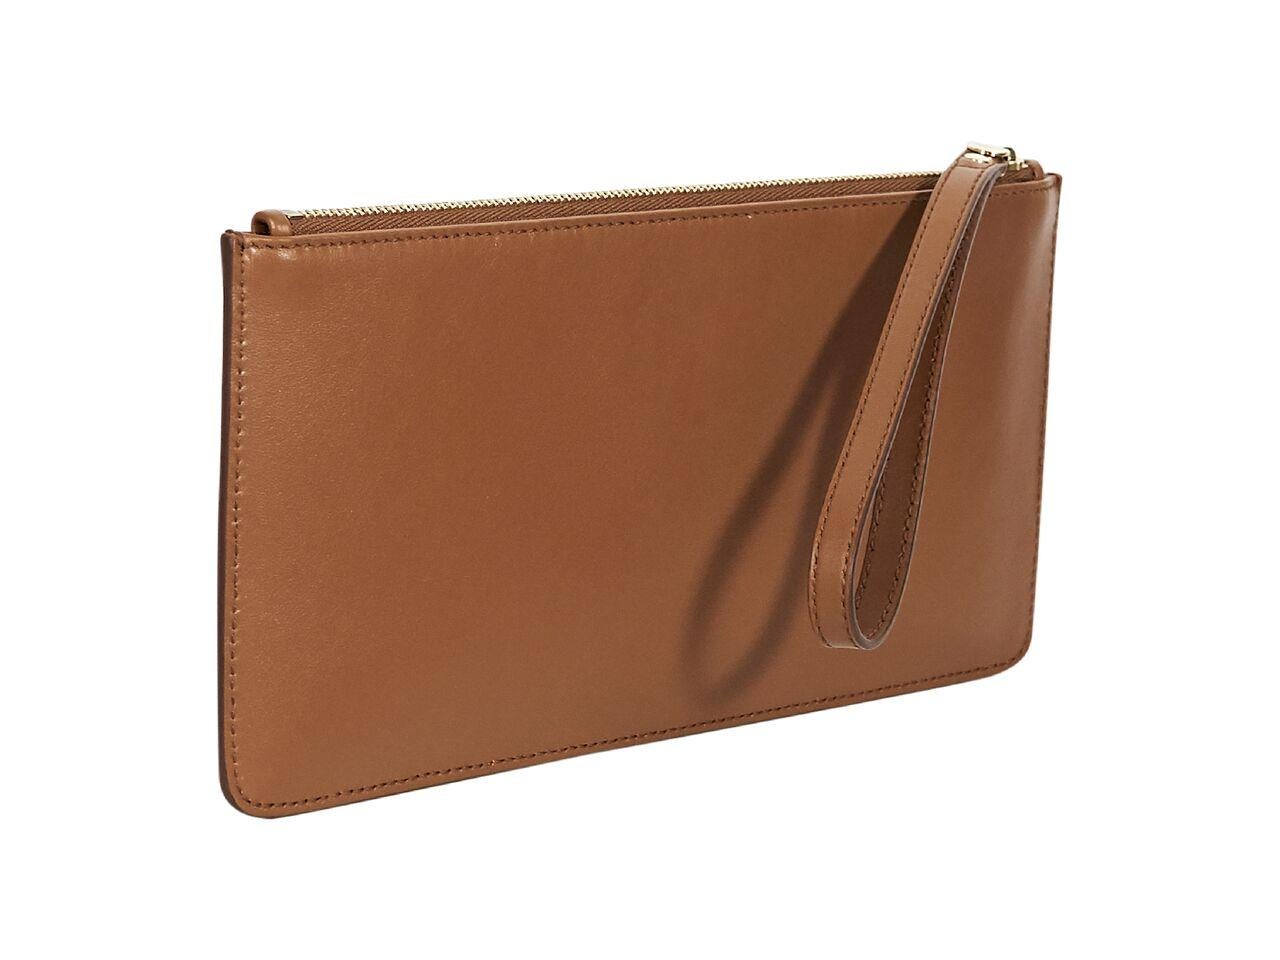 Product details:  Brown leather wristlet pouch by Salvatore Ferragamo.  Wristlet strap.  Top zip closure.  Lined interior.  Perforated logo design at front.  9.5